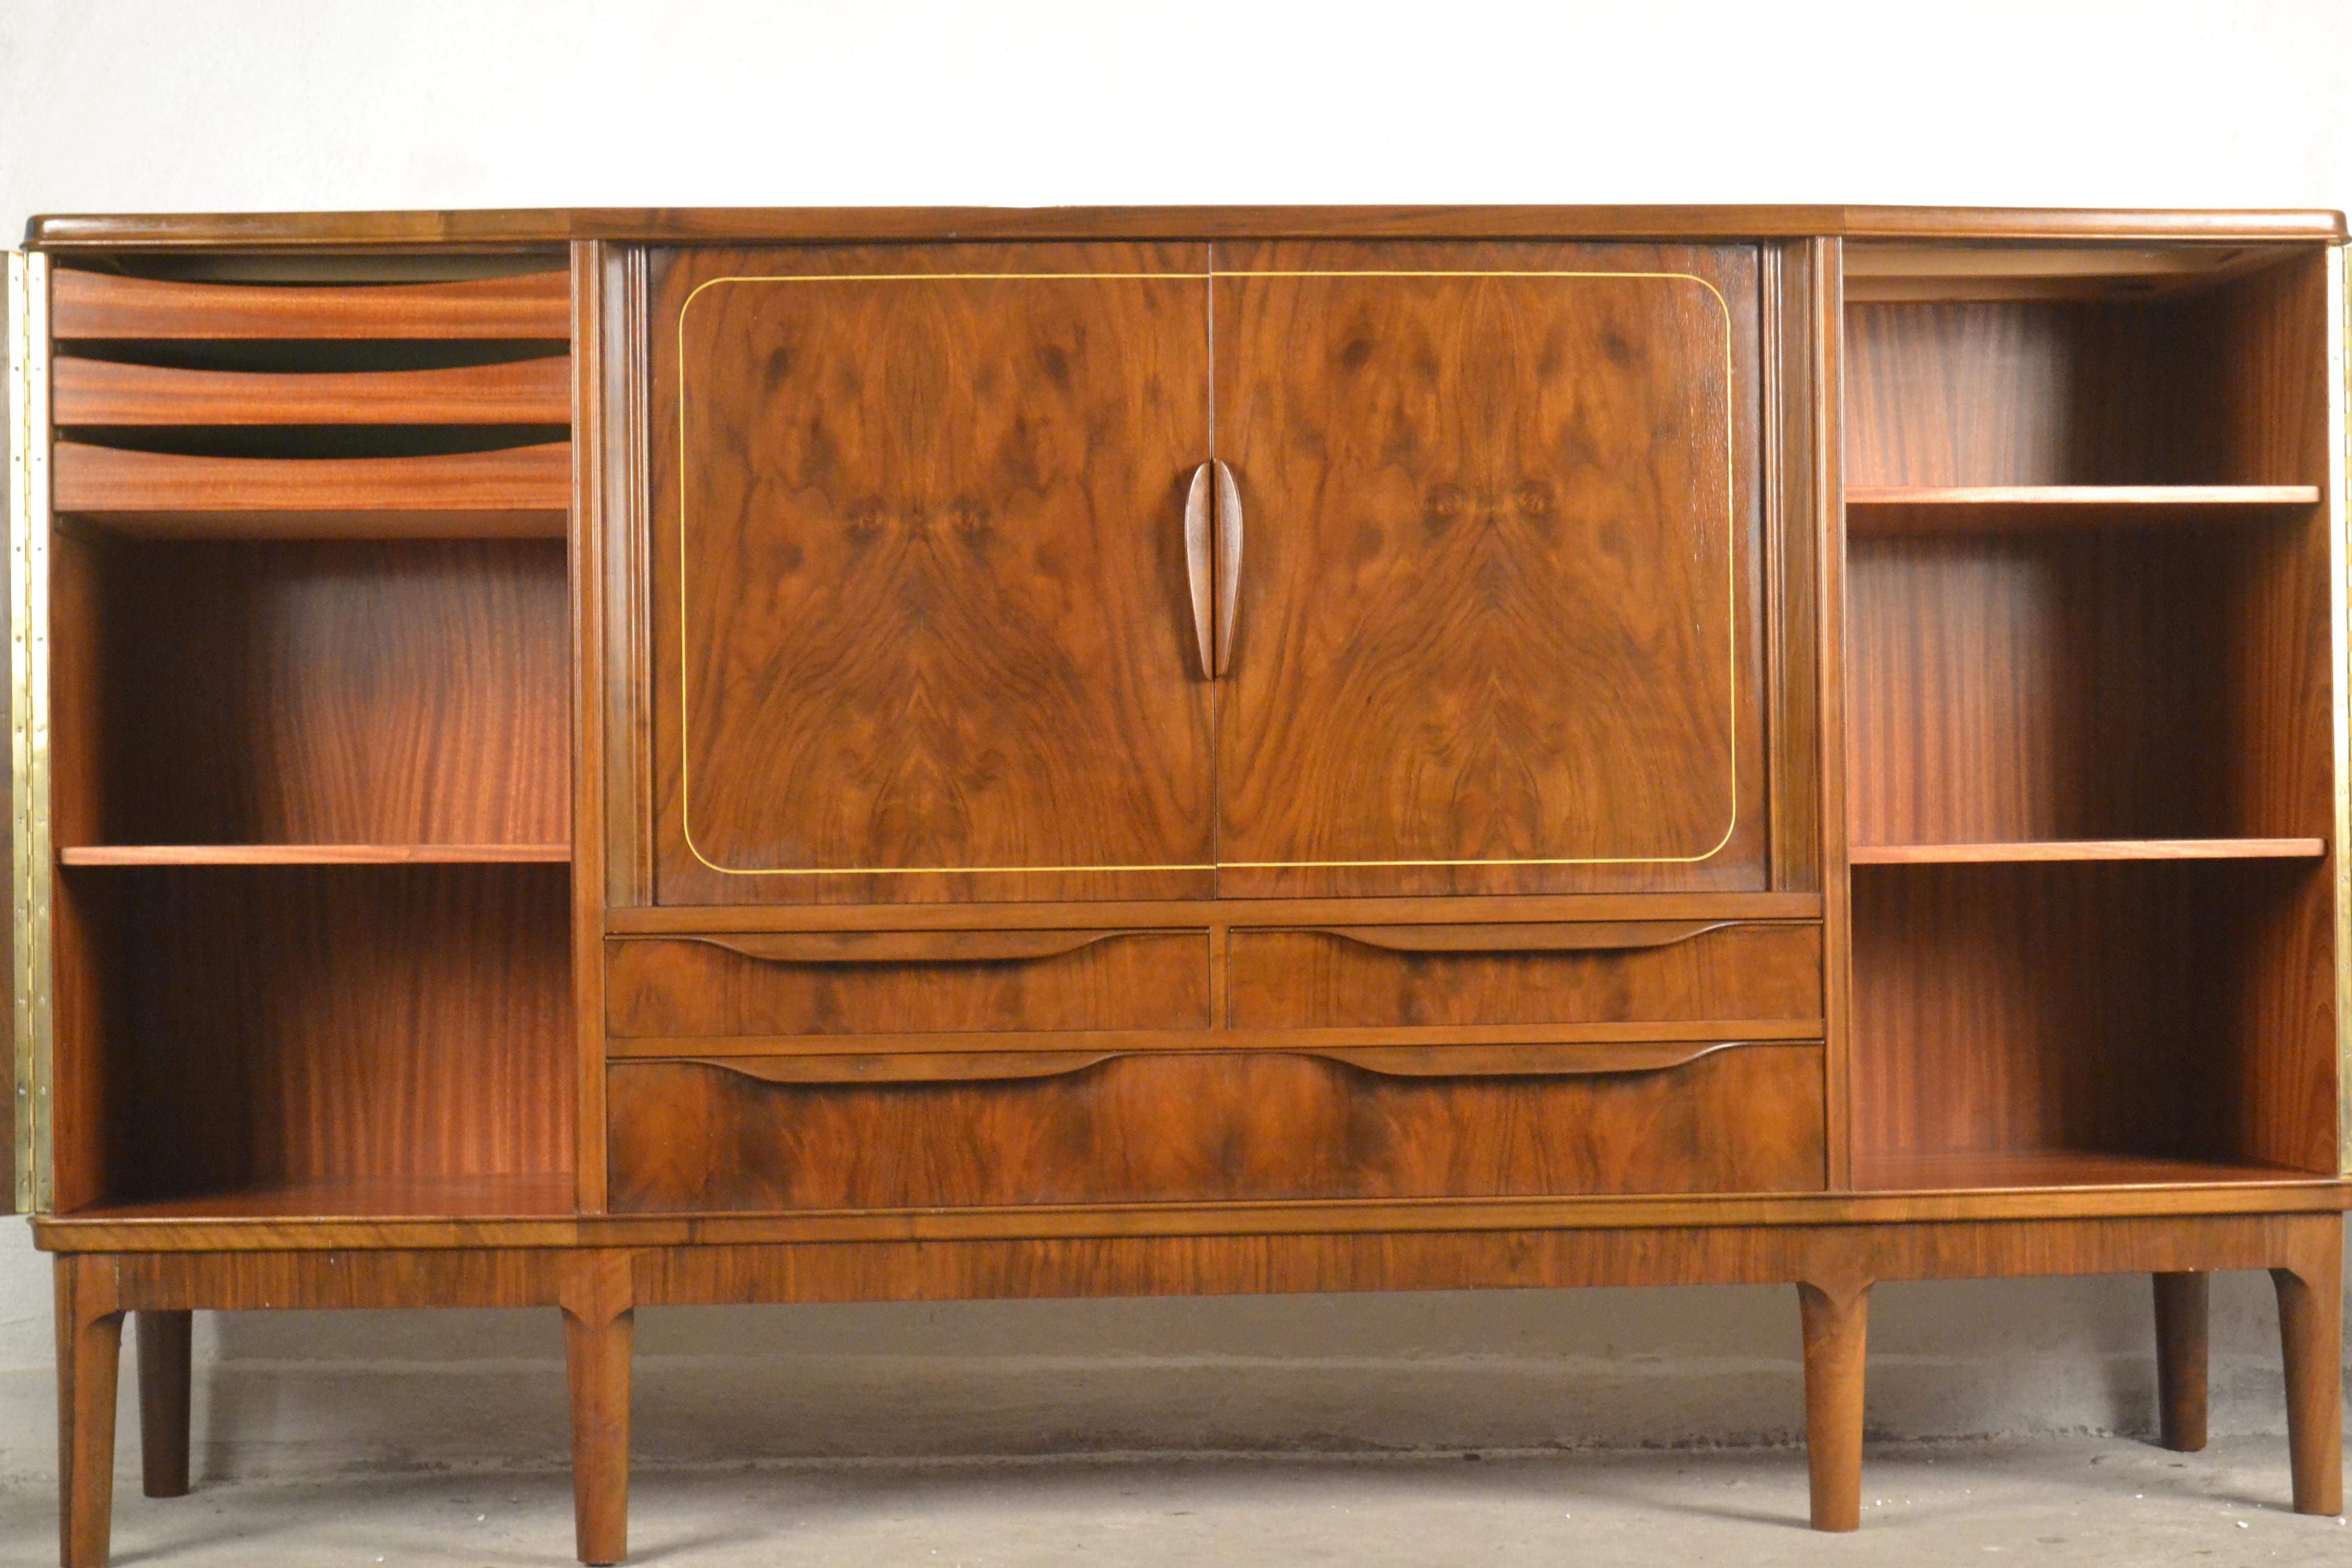 Danish, rosewood highboard from the 1960s. Fully original . Attractive, functional form and perfect workmanship.